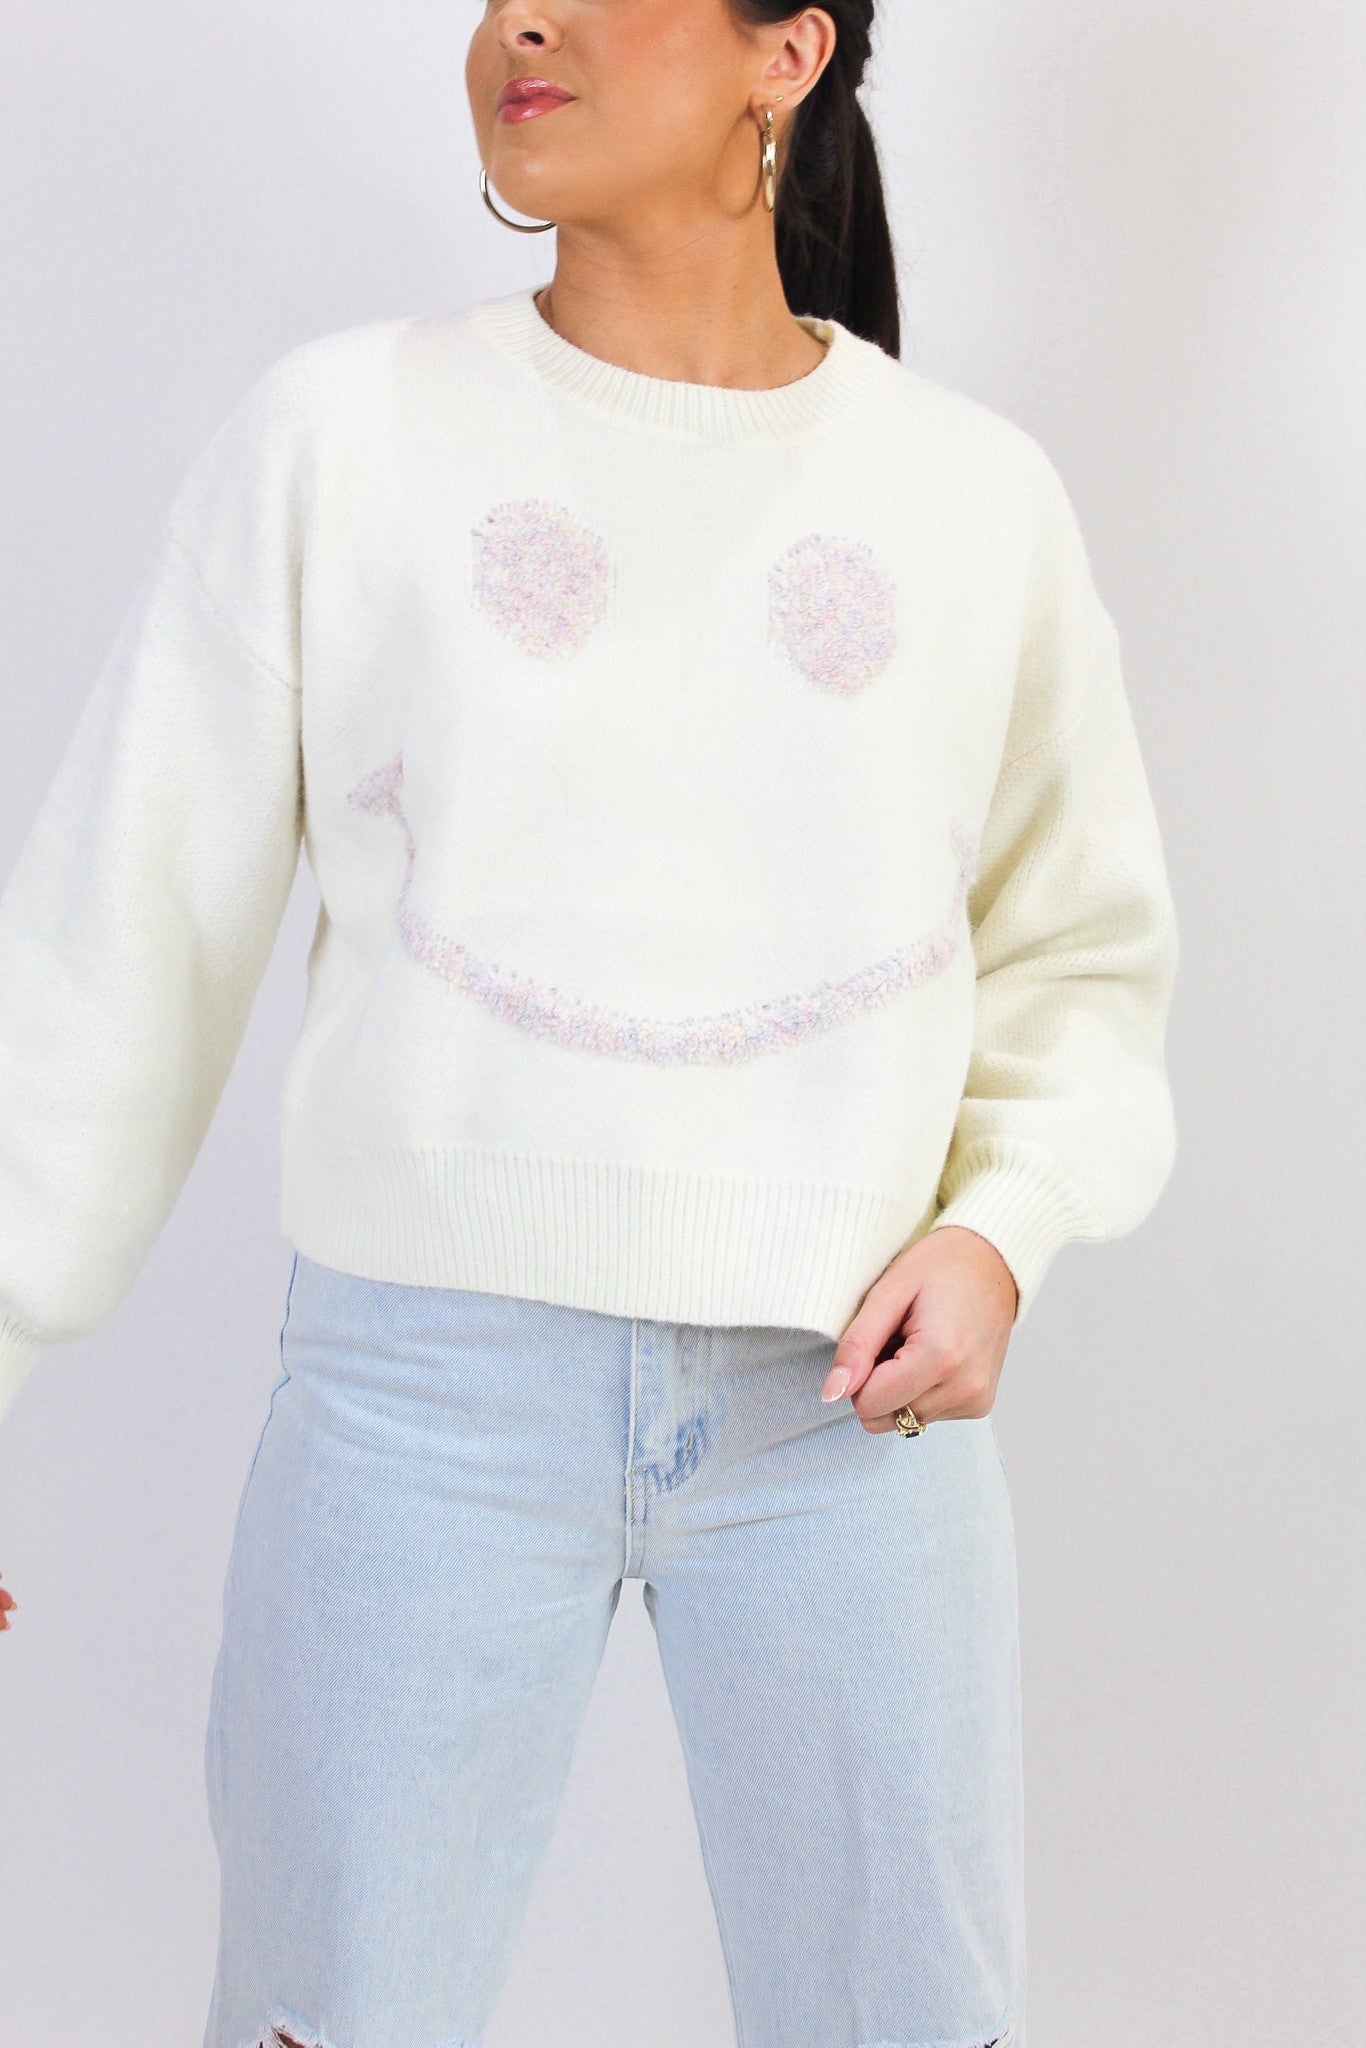 All Smiles Here Sweater